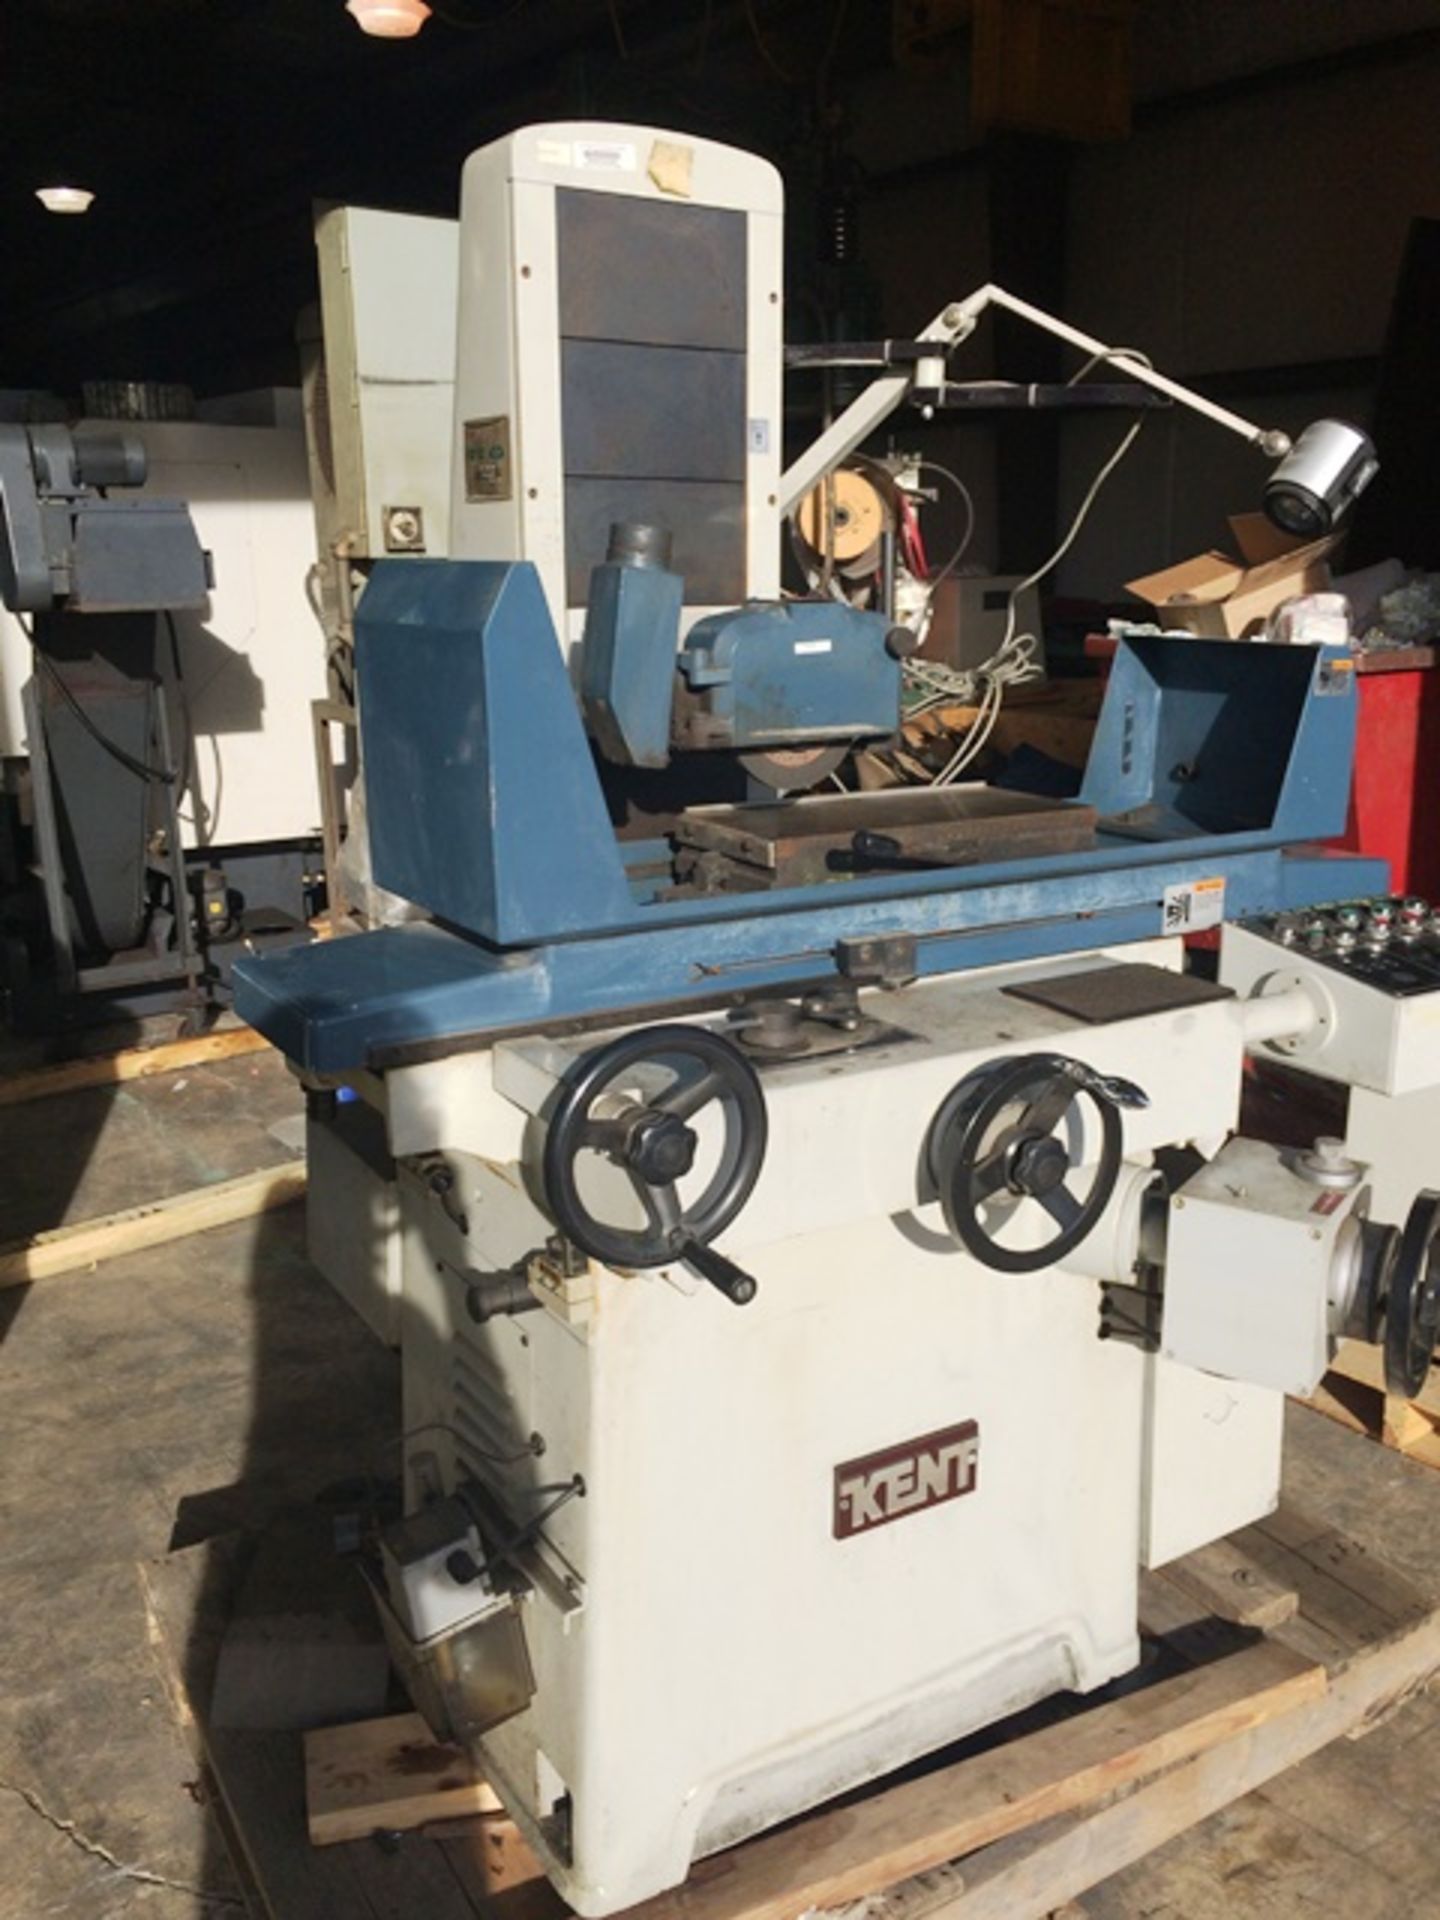 Kent Model KGS 818 AHD 8" x 18" Hydraulic Surface Grinder with 8" x 18" Permanent Magnetic Chuck, - Image 4 of 4